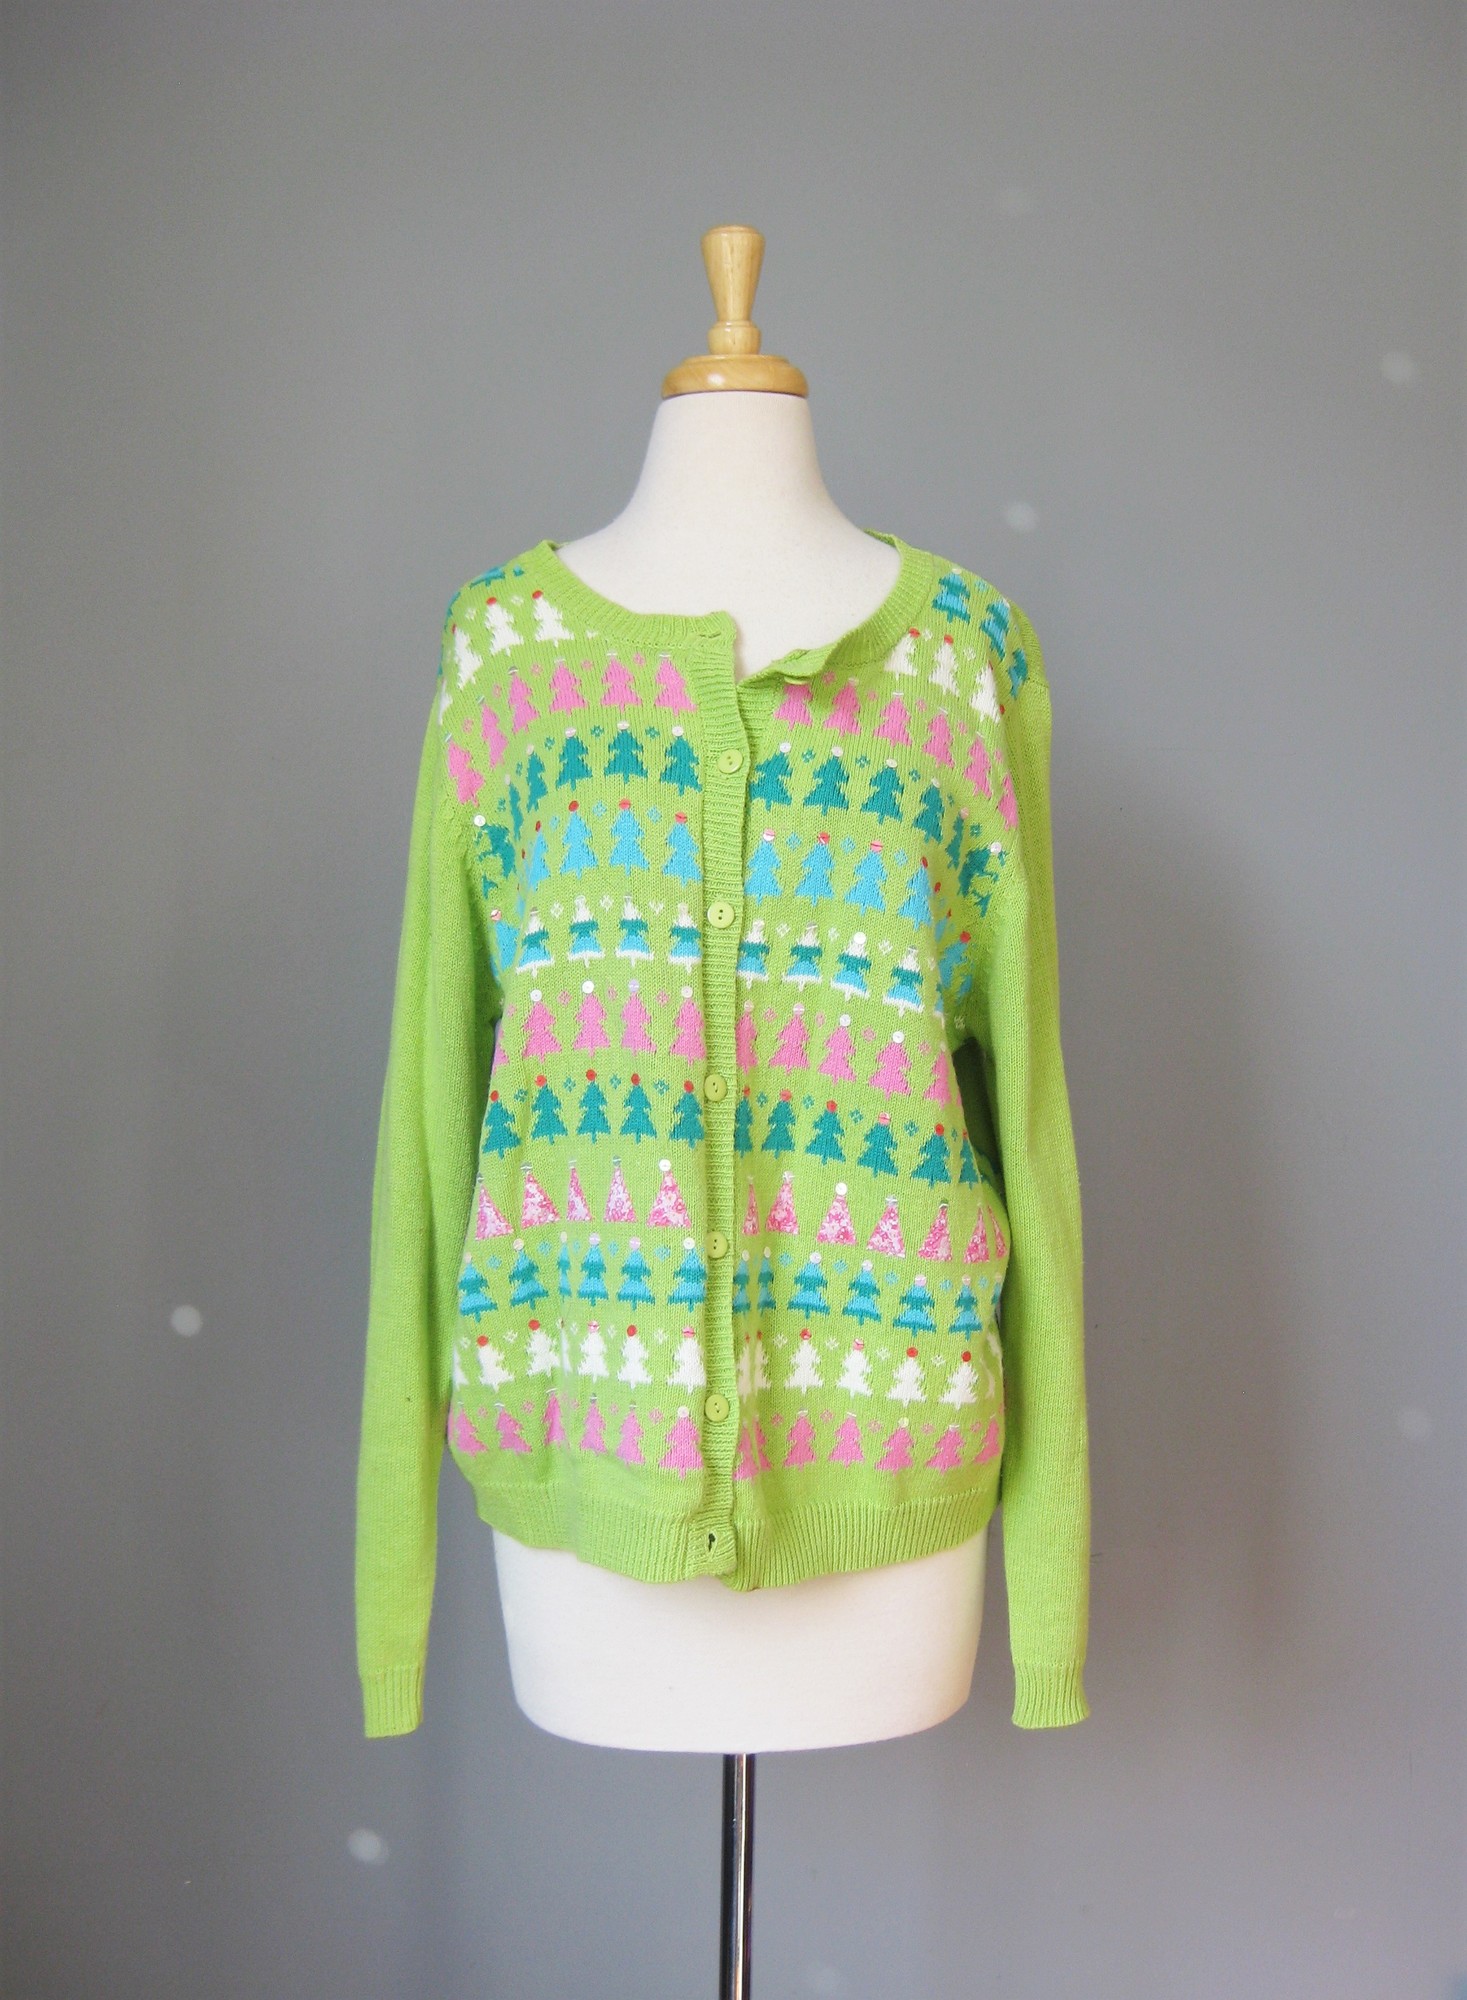 Tiara Intrnatl Christmas, Green, Size: XL
Christmas Cardigan with a twist in a happy light green color.
Embroidered and sequined with pastel Christmas Trees Tiara International
Size XL 55% ramie
45% cotton
Plastic buttons
Flat measurements:
armpit to armpit: 22.5in
length: 25in
Almost perfect condition with teeny spots of rust or something on one sleeve and a spot at the edge of the hem in front as shown.

Thanks for looking1
#7538